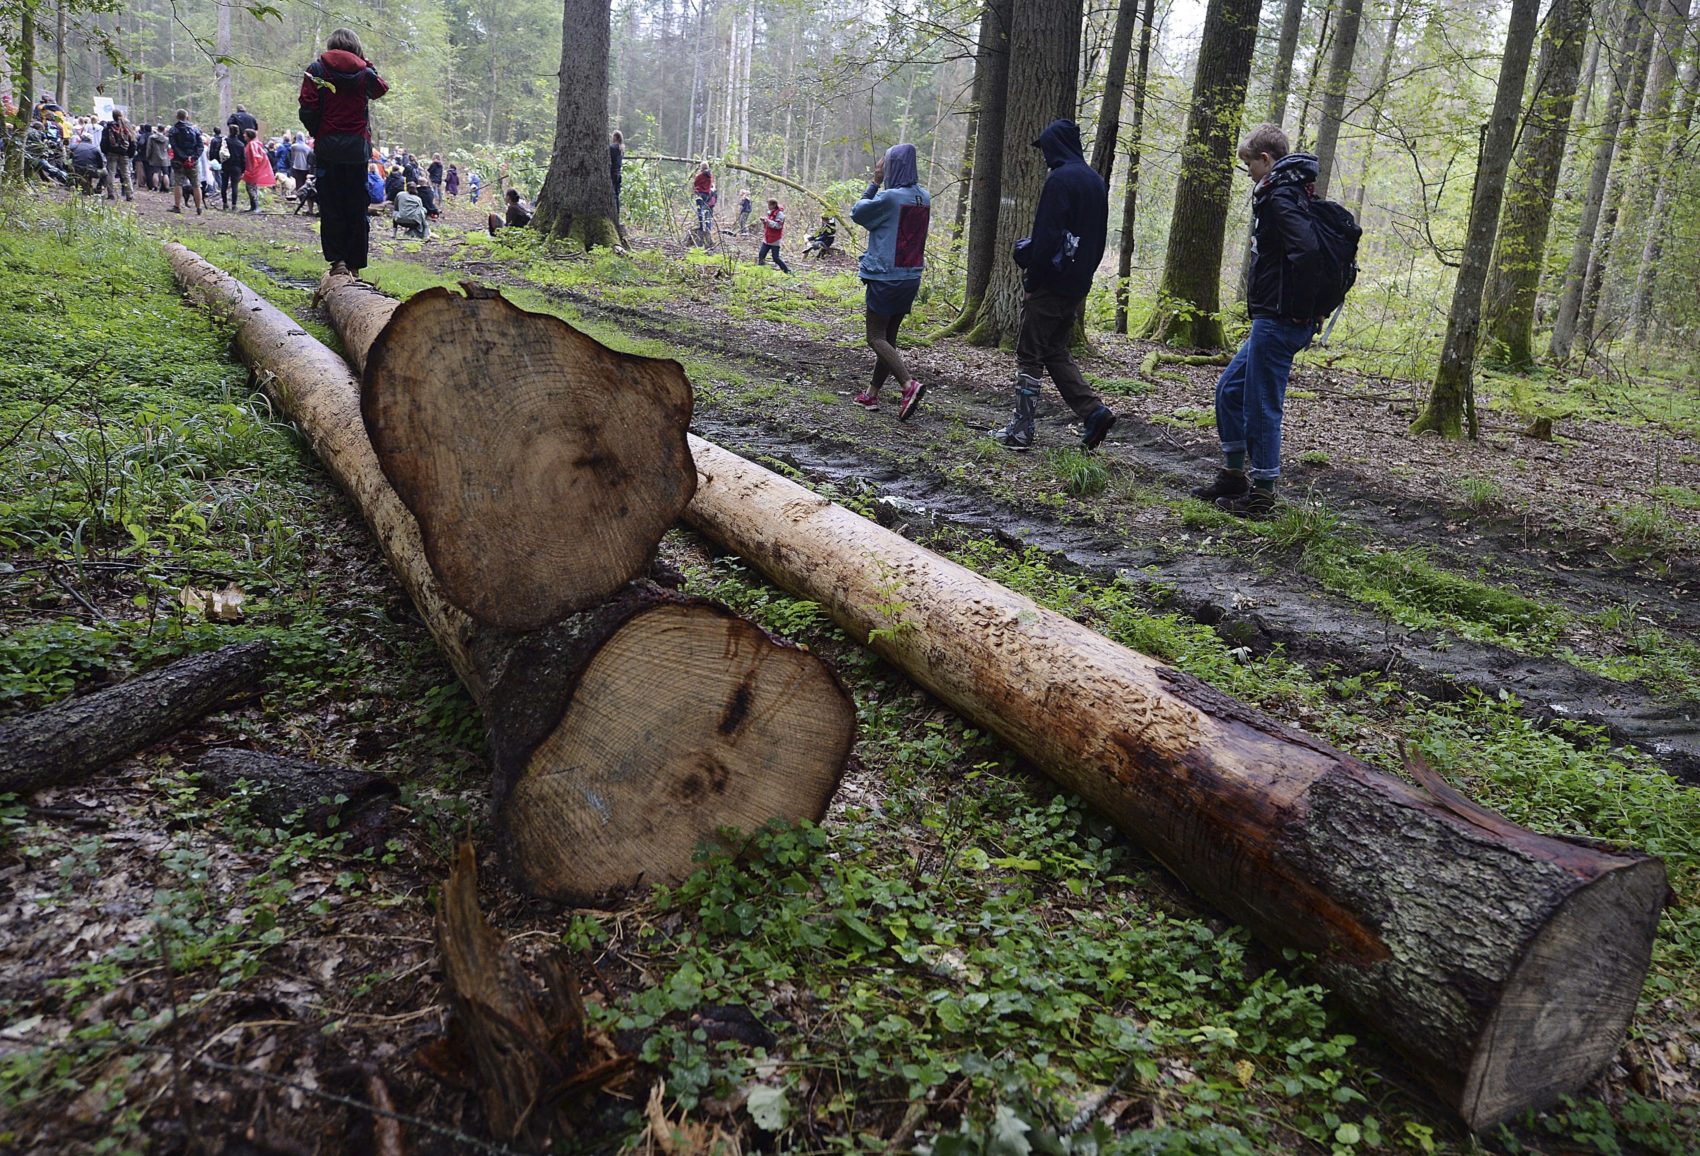 People take part in a protest against largescale government logging in the Bialowieza Forest, Poland. (Czarek Sokolowski/AP)